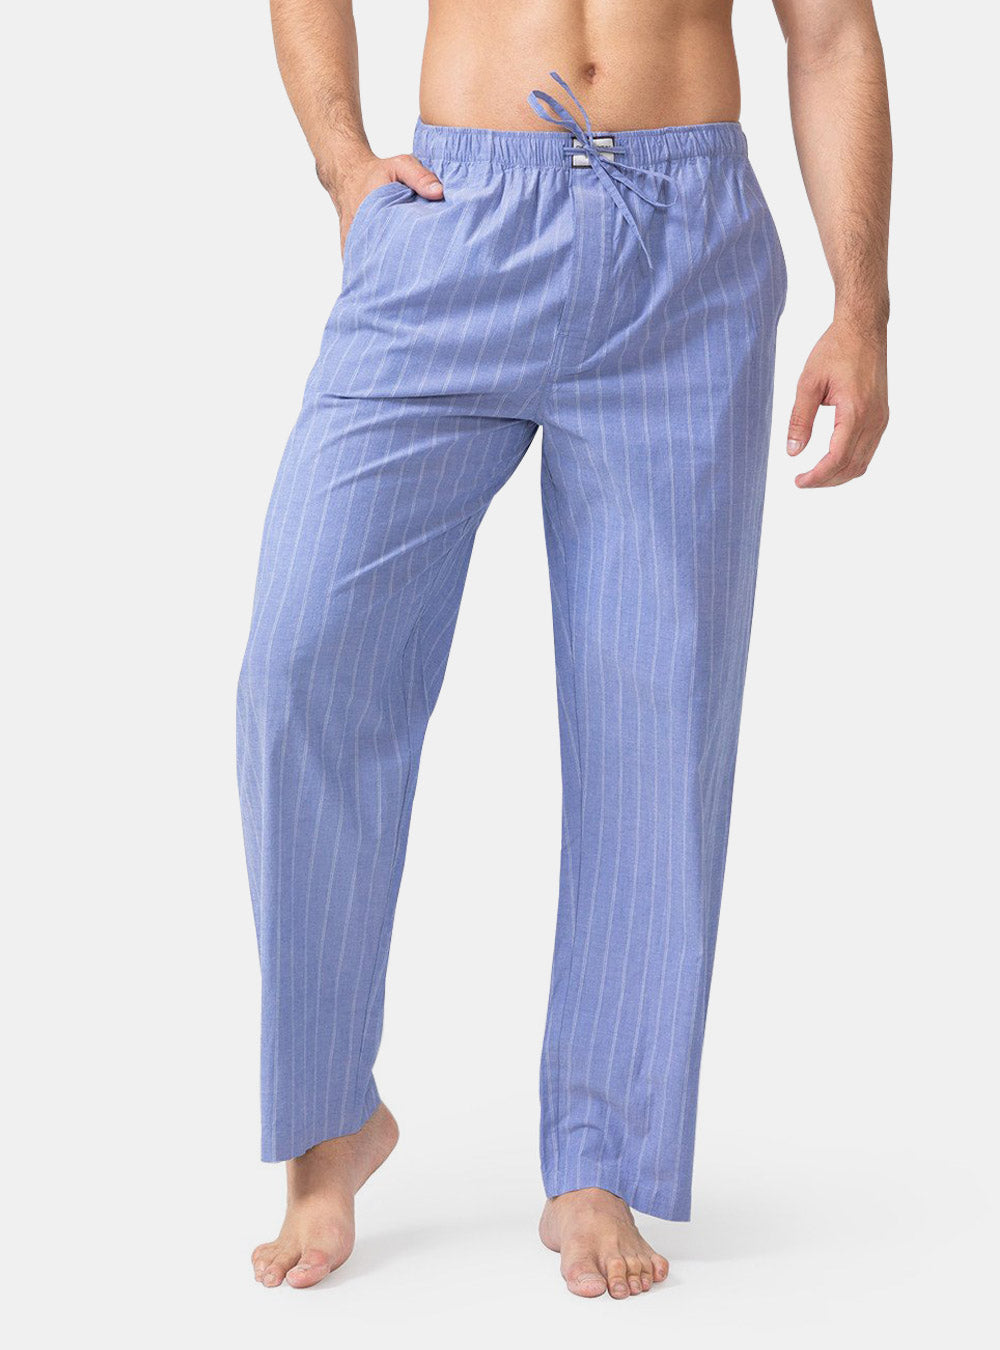 Buy JupiterSecret Mens Pajama Pants Set Flannel Cotton Plaid Sleep  Lounge  Pants PJ Bottoms with Pockets and Button Fly 100 Cotton Pack of 3  Medium at Amazonin